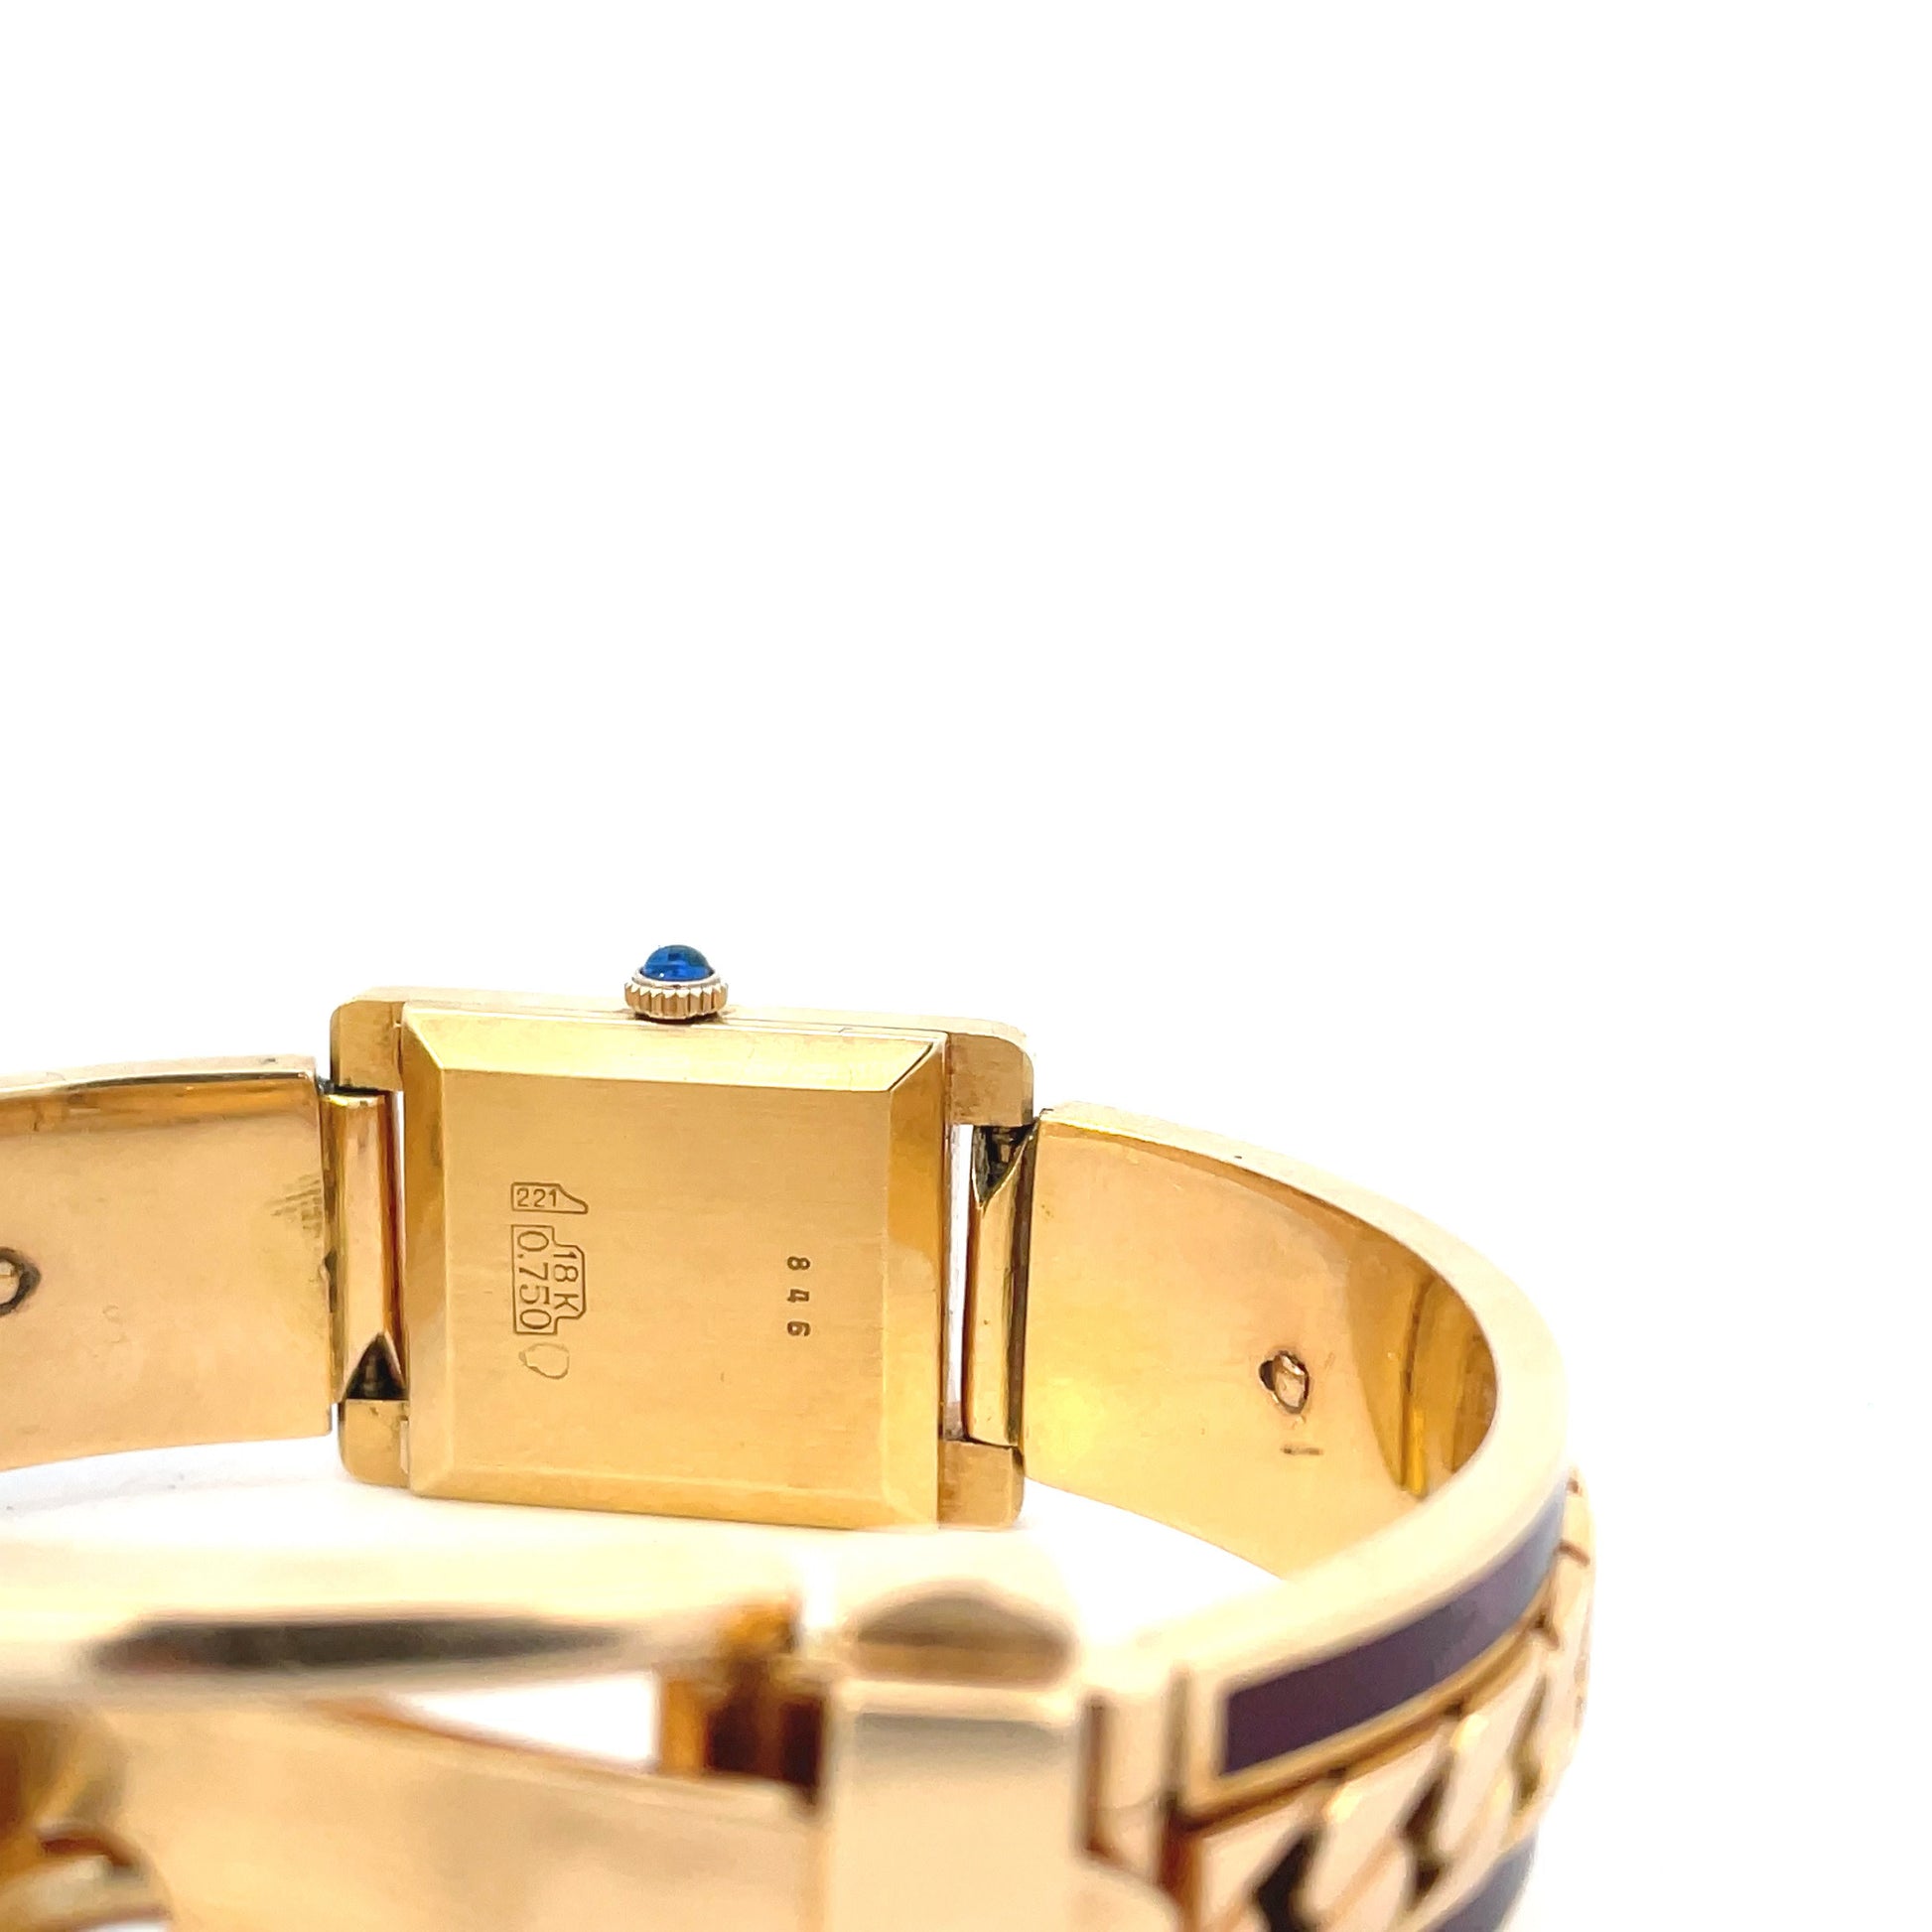 Gucci 1970s 18KT Yellow Gold & Enamel Bracelet Watch close-up back of face